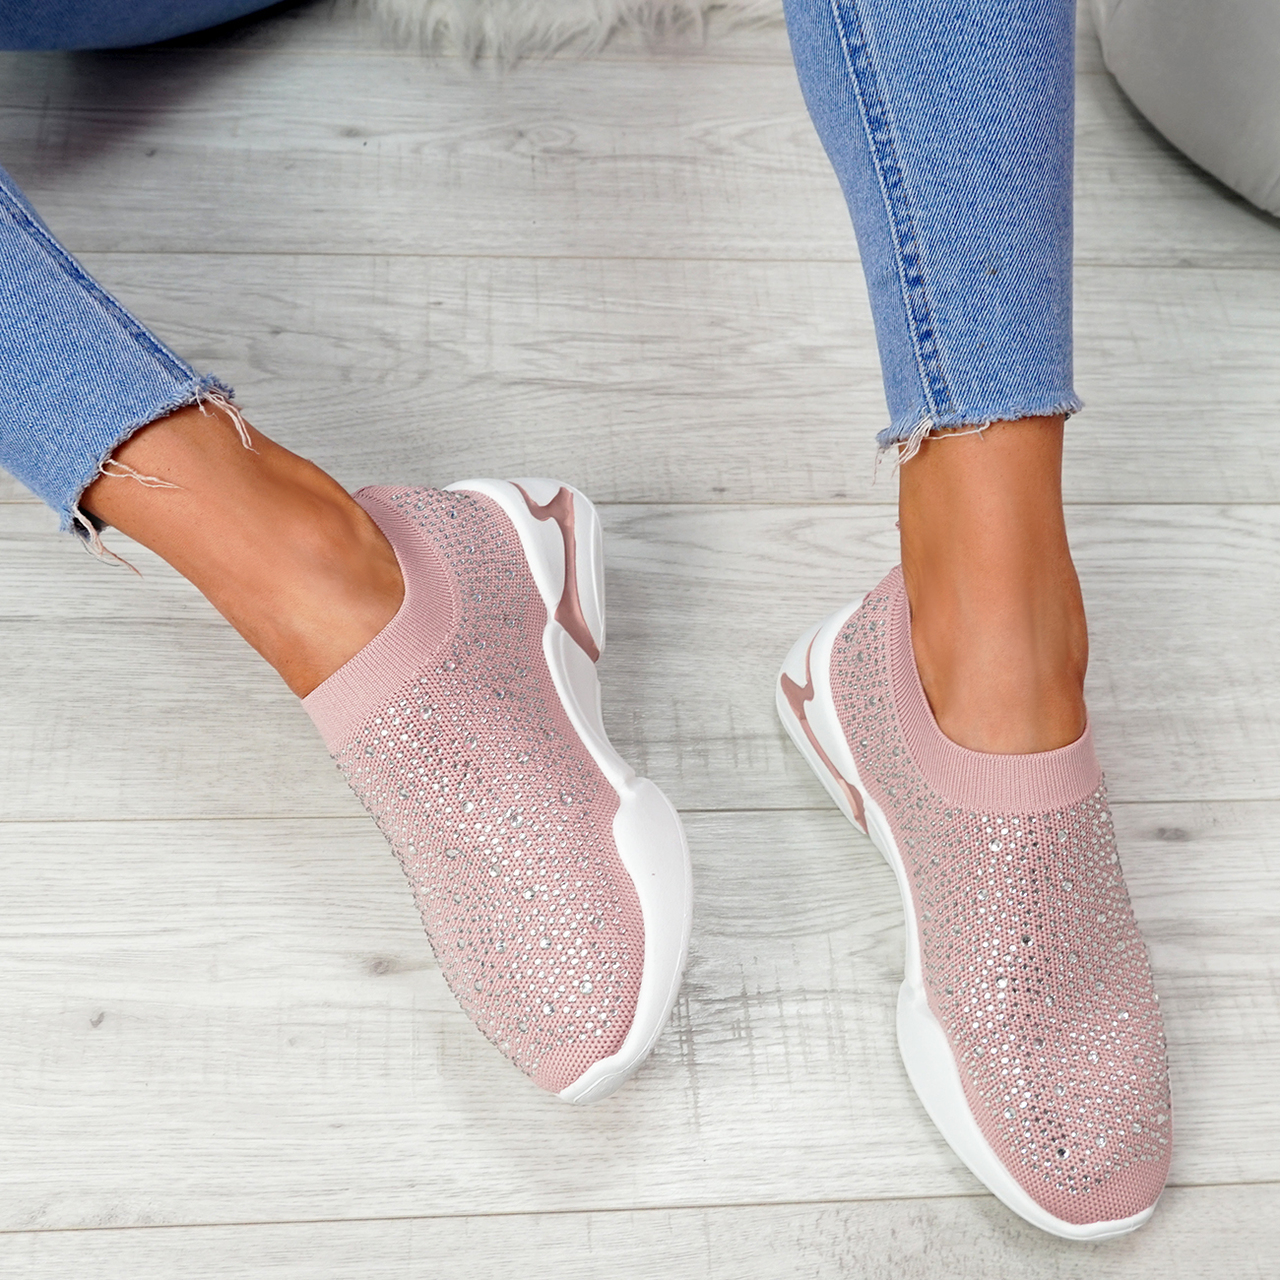 The new trend : knitted slip on trainers! - Cucu Fashion